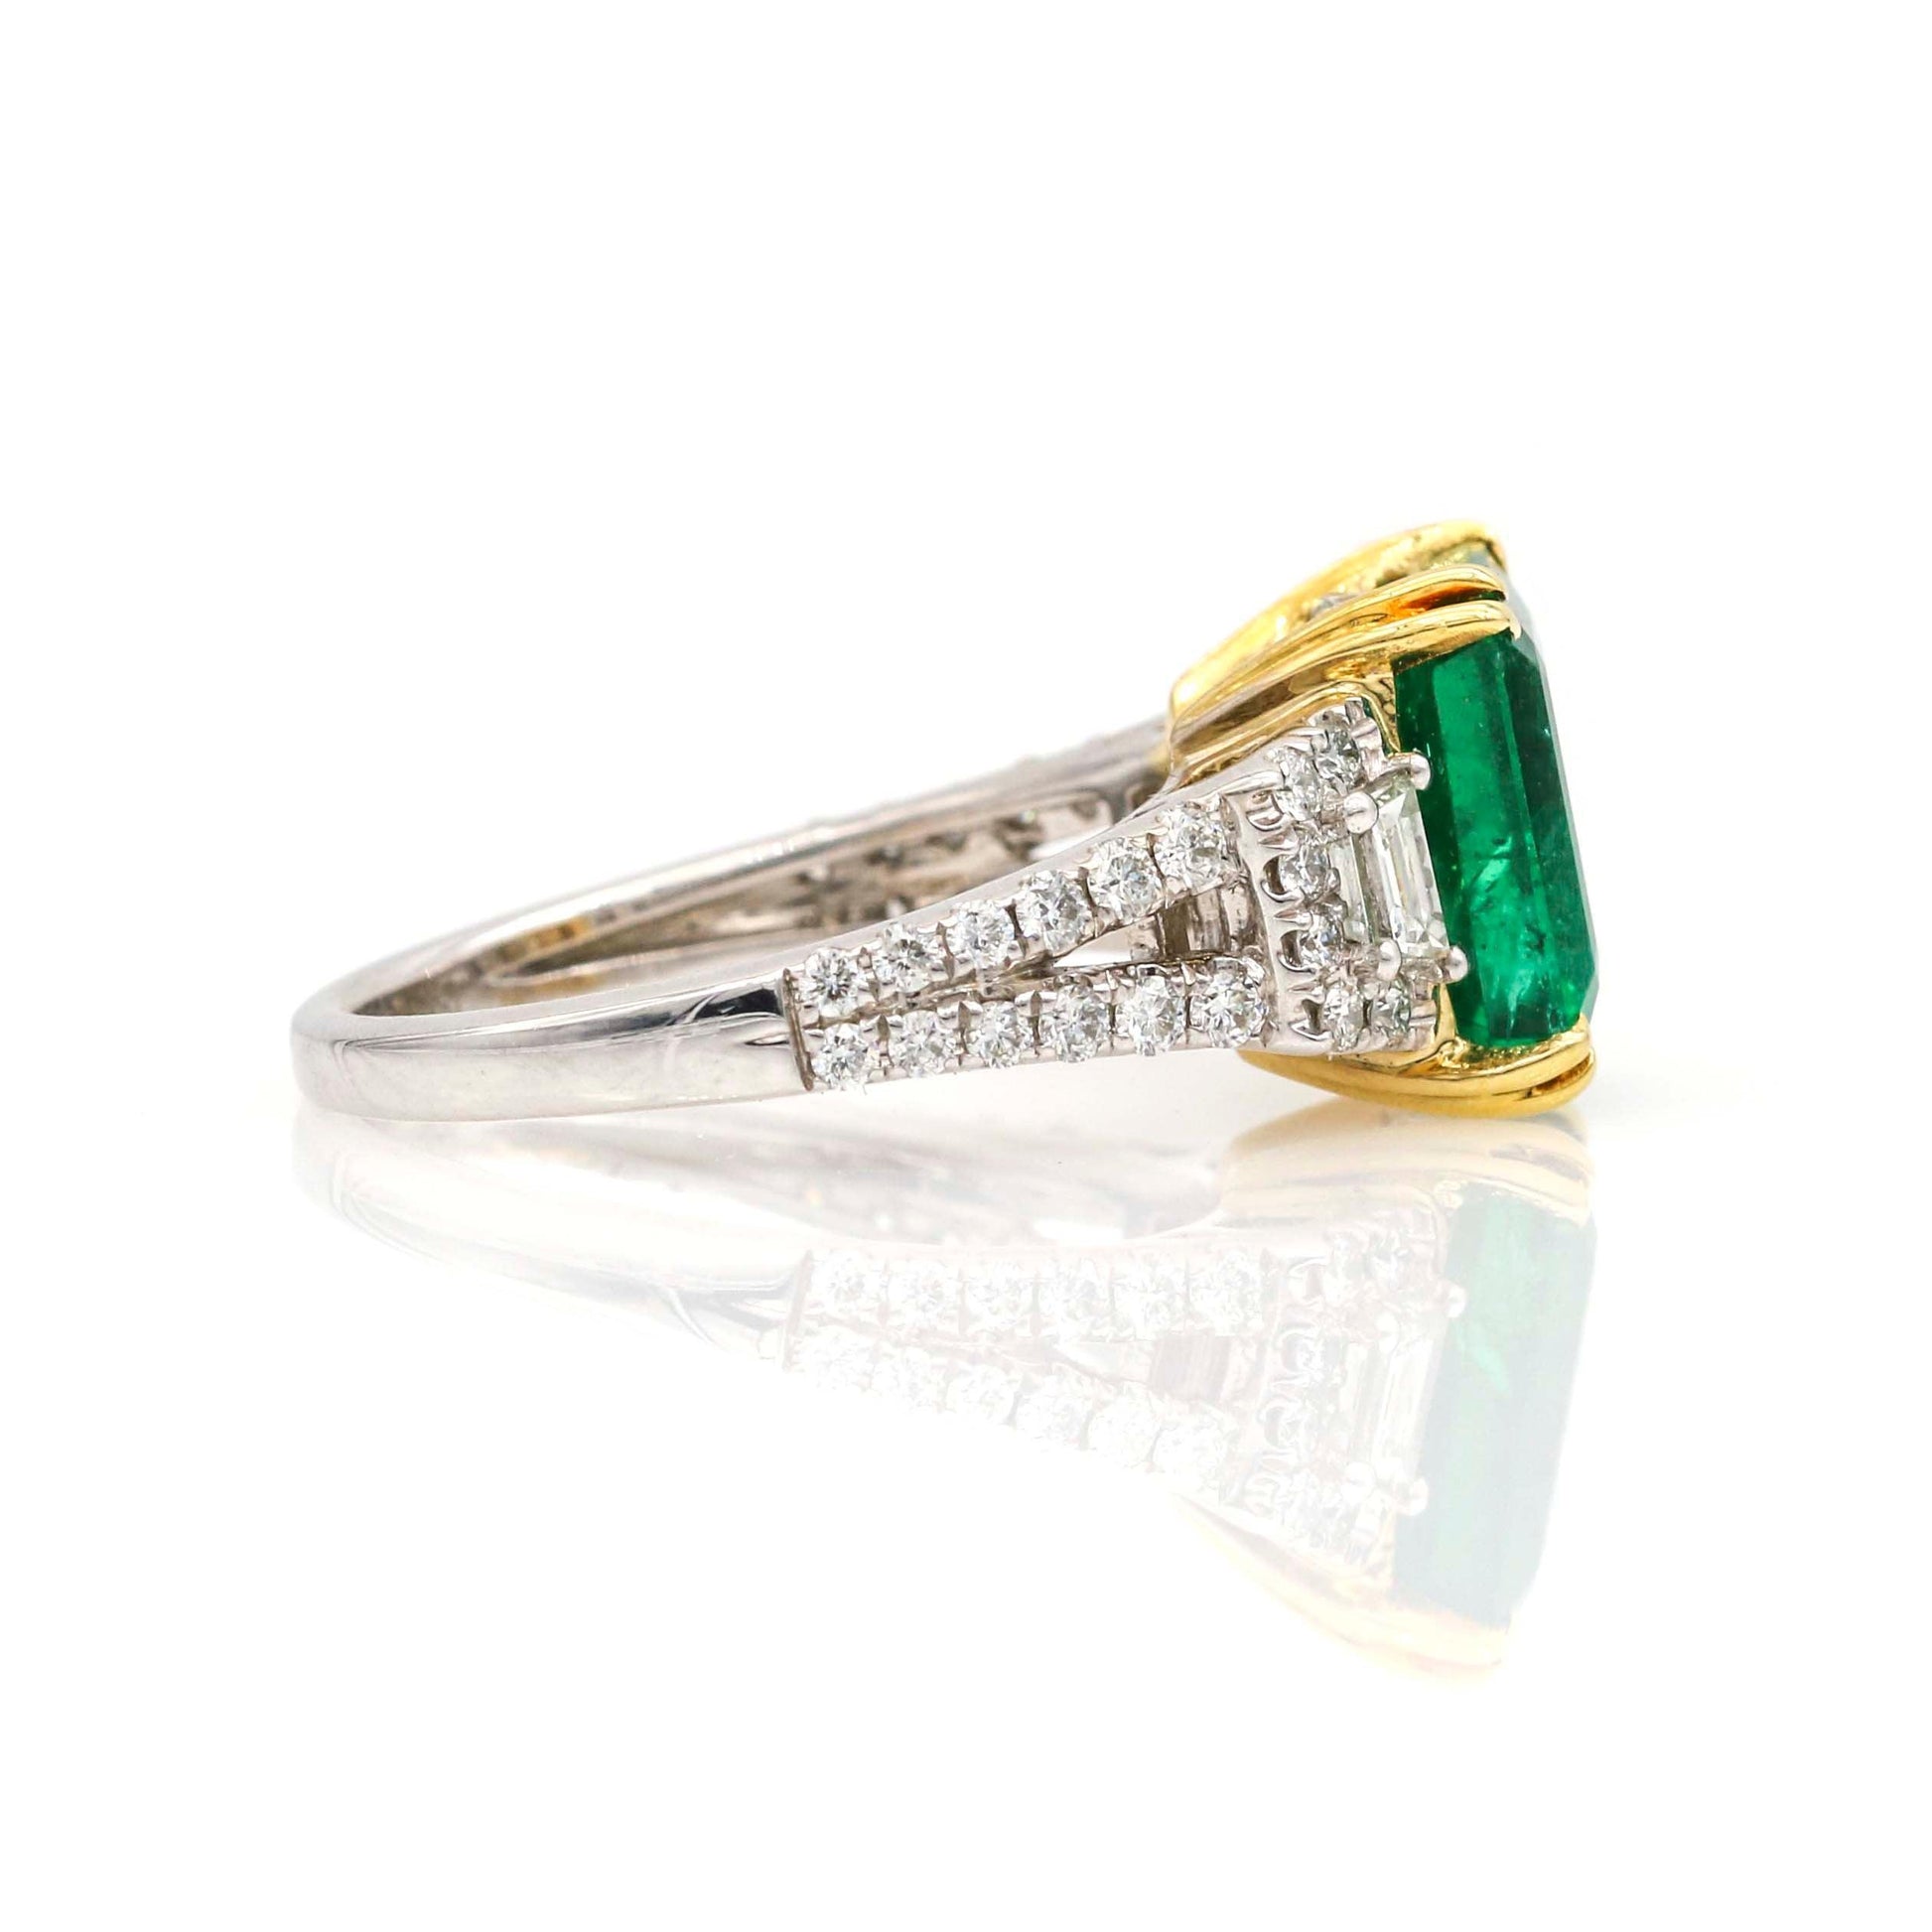 Women's Ed.B Emerald Diamond Ring in 18k Yellow and White Gold 3.68 cttw - 31 Jewels Inc.